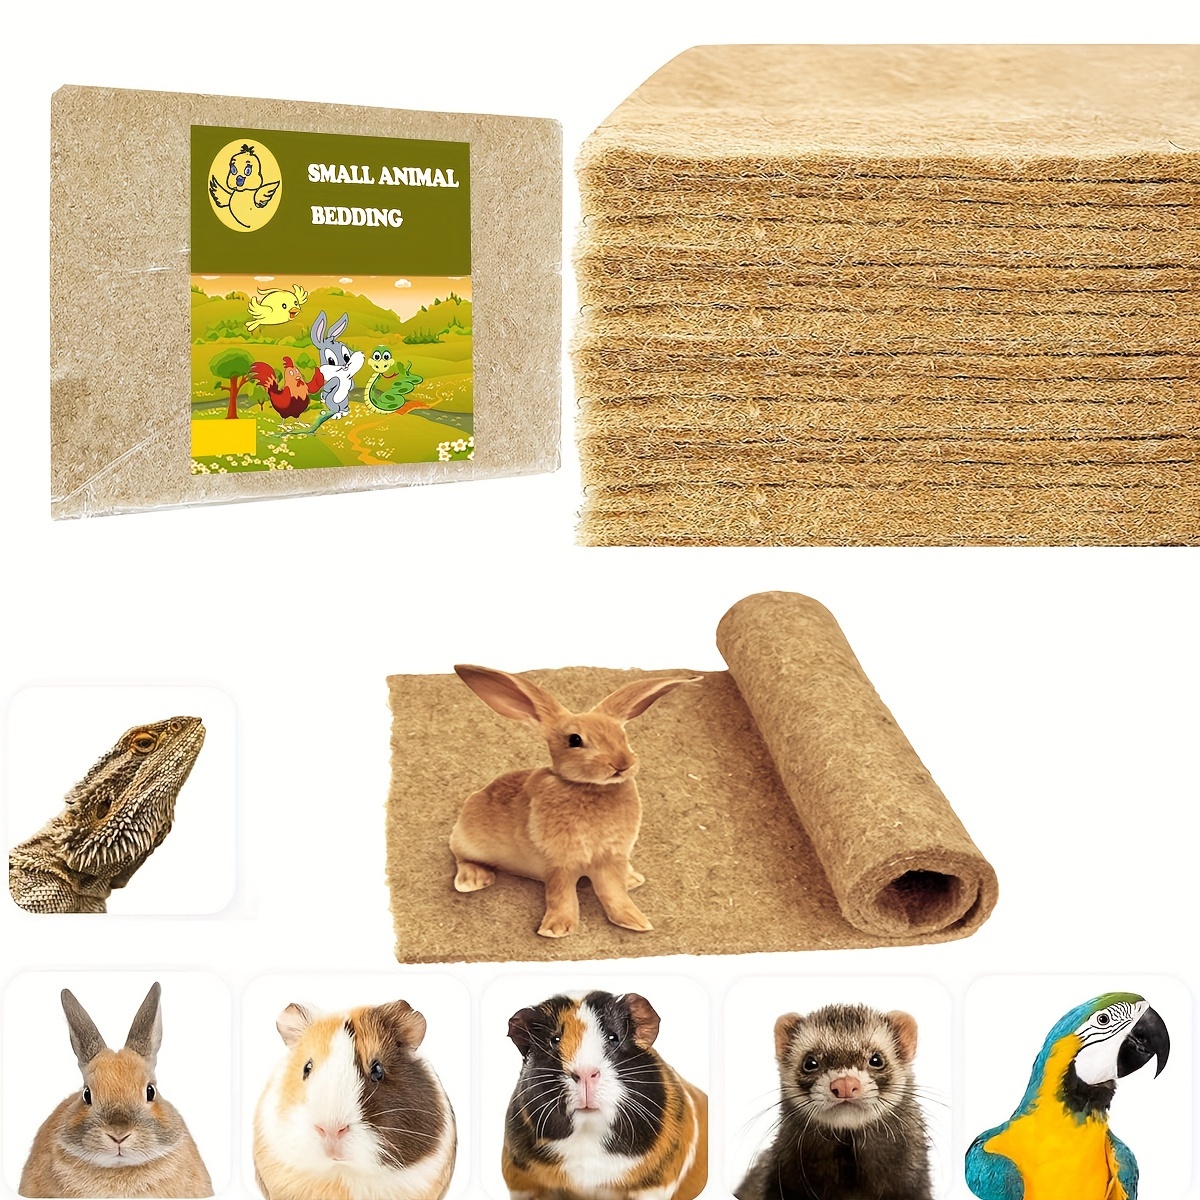 

Ultimate Comfort Small Animal Bedding - Absorbent Liners For Guinea , Hamsters & Rabbits